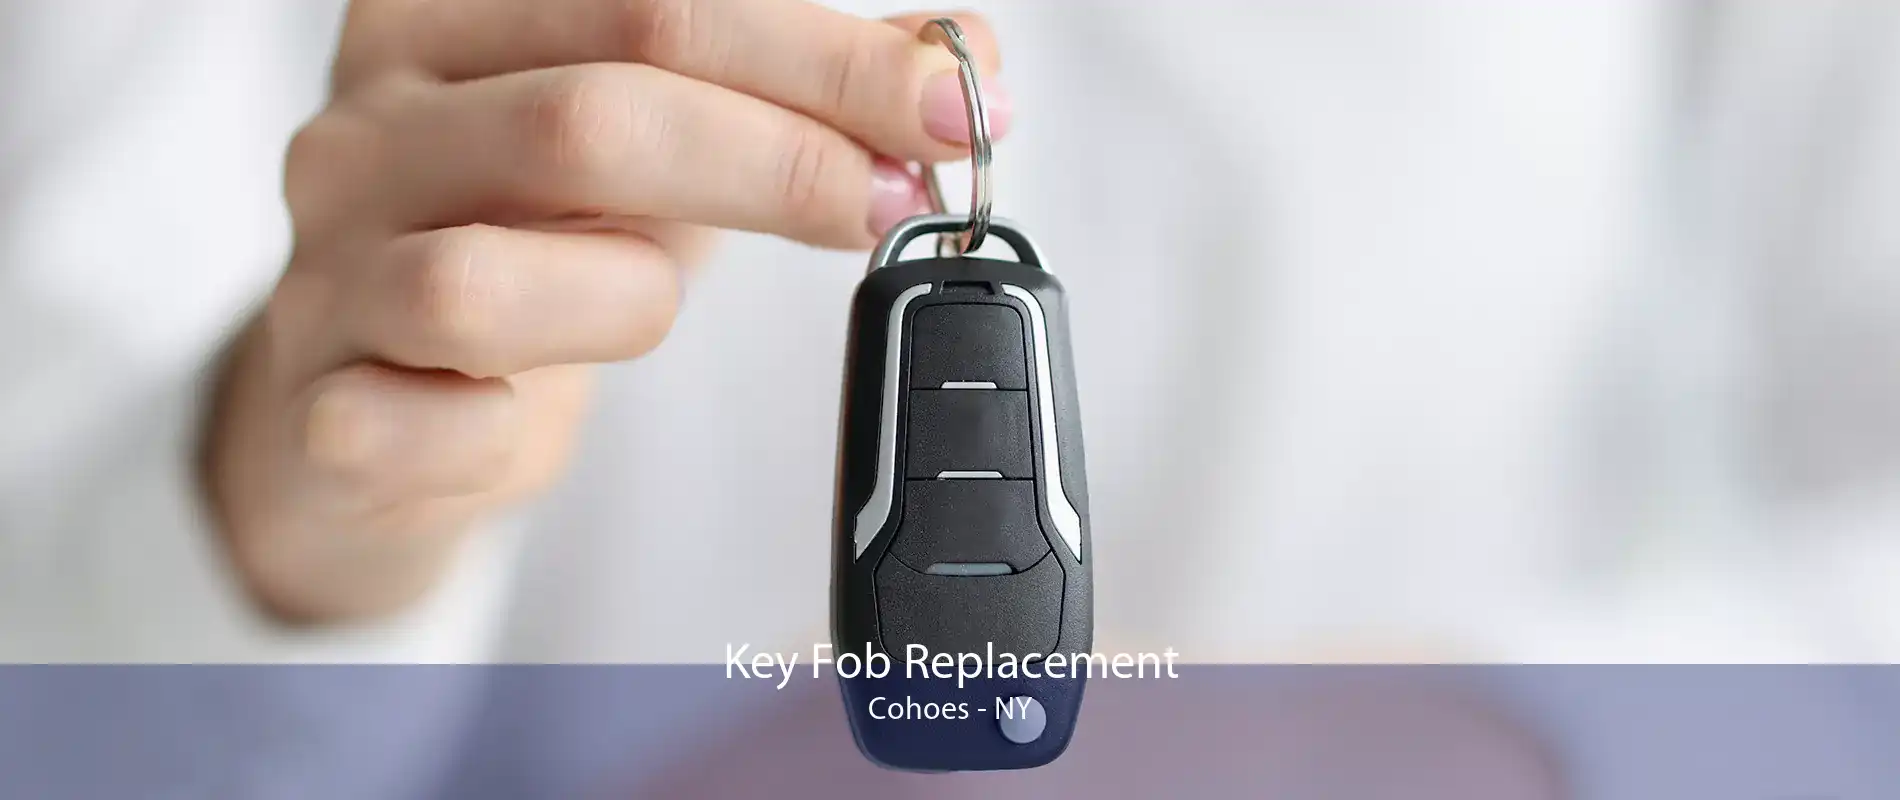 Key Fob Replacement Cohoes - NY